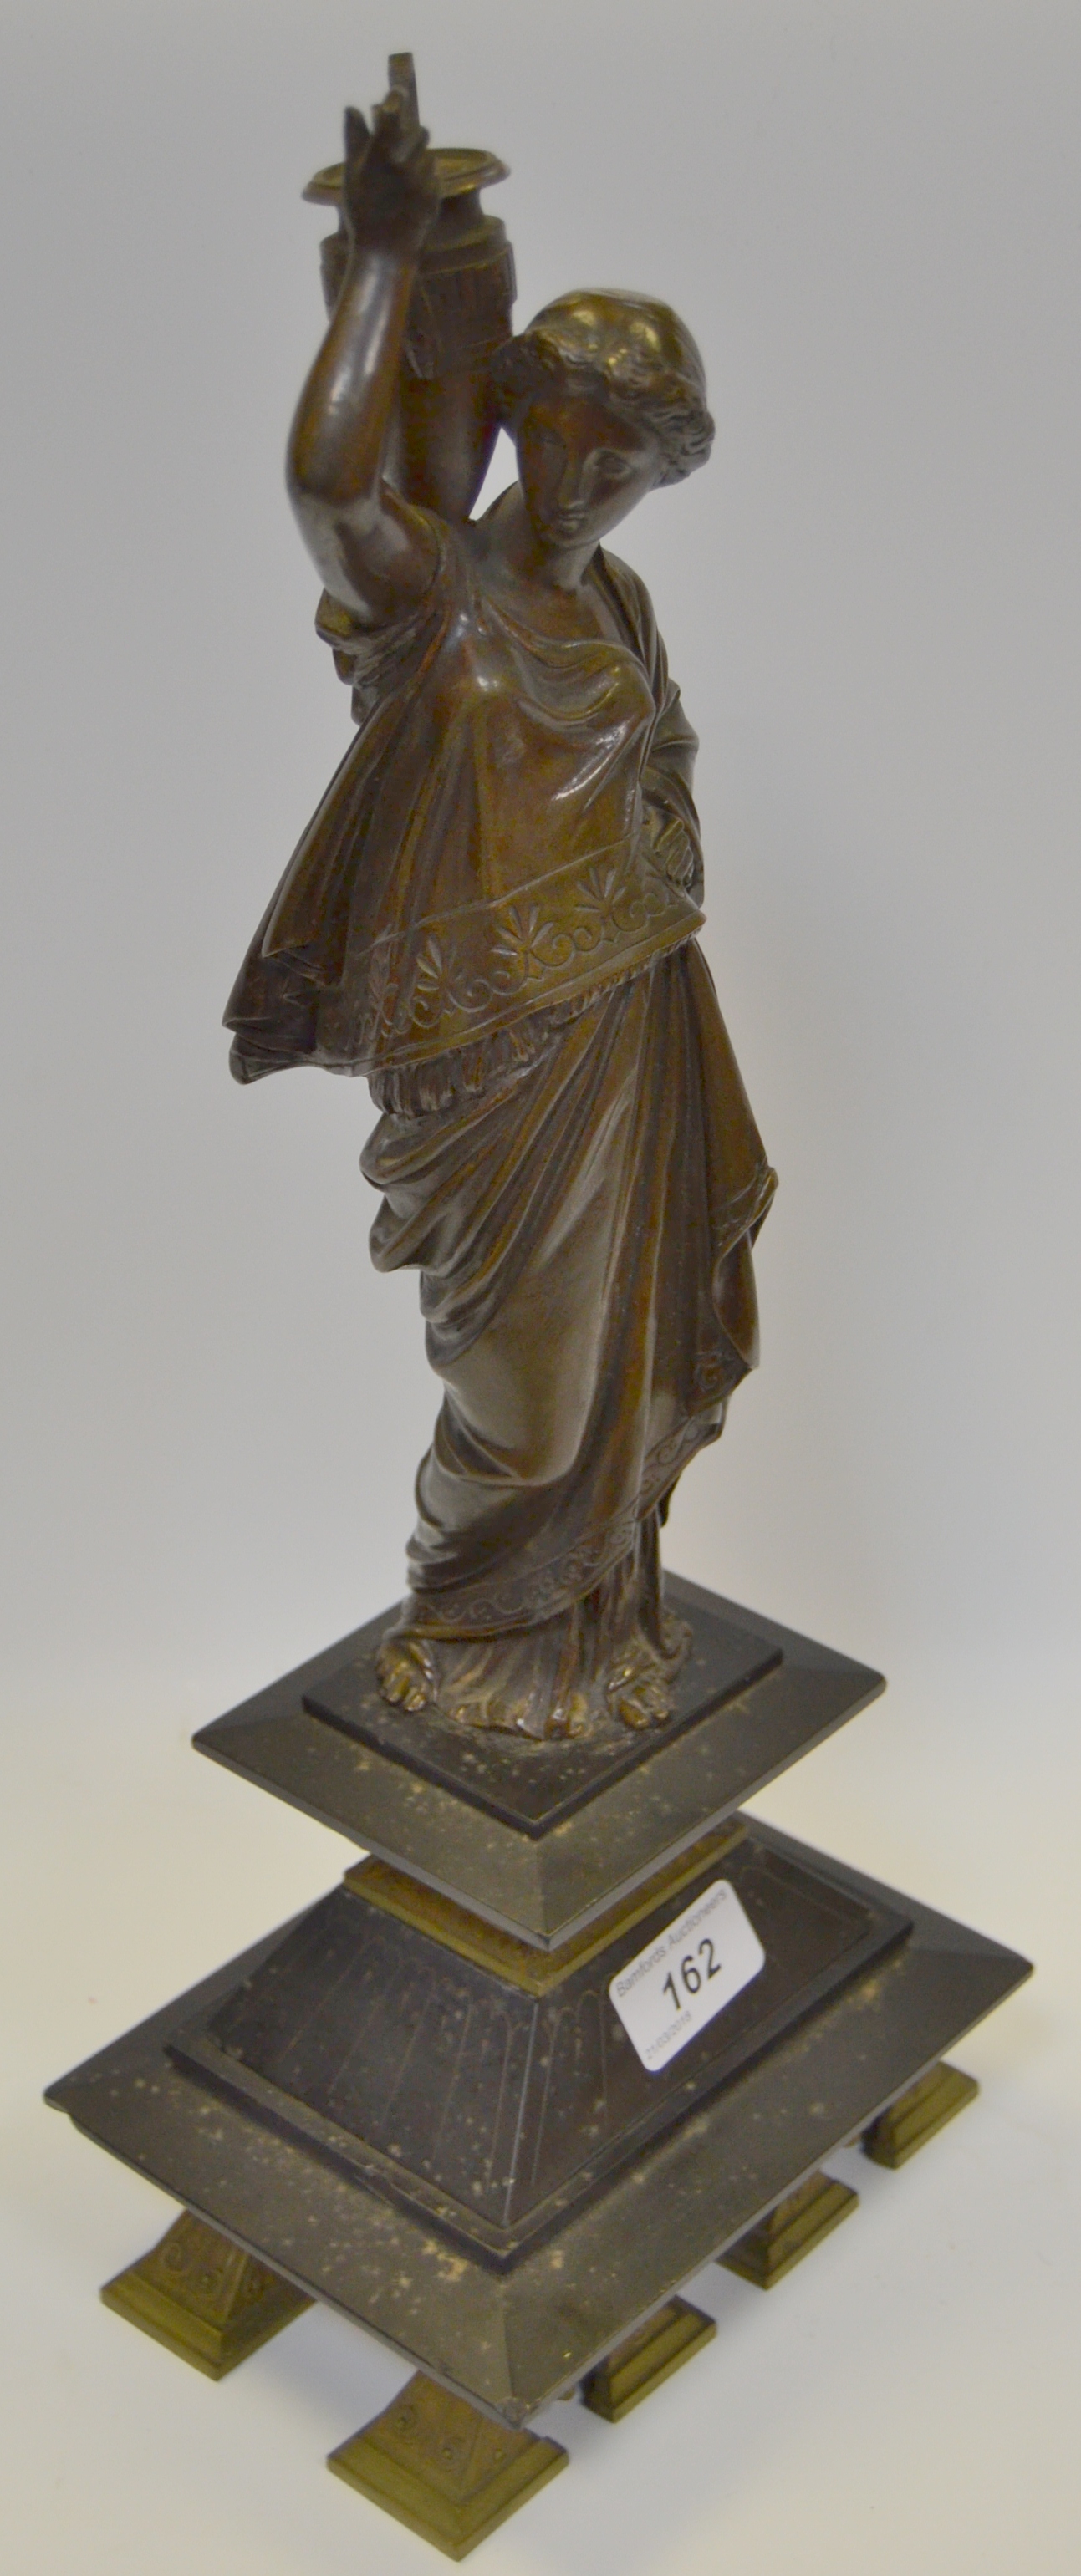 An early 20th century bronze figure of a Woman dressed in robes carrying a twin handled urn,